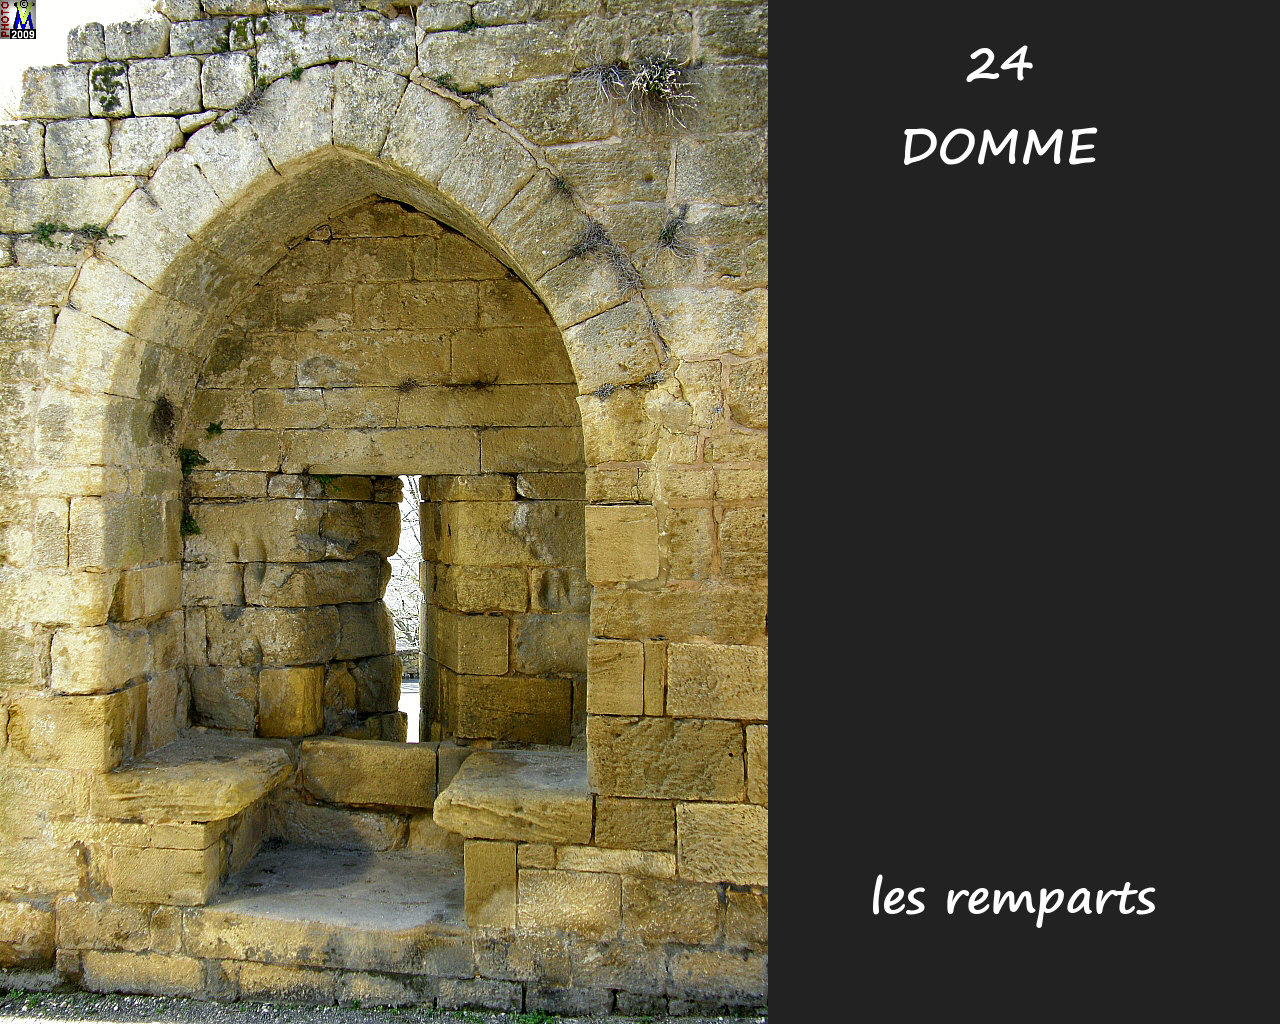 24DOMME_remparts_108.jpg